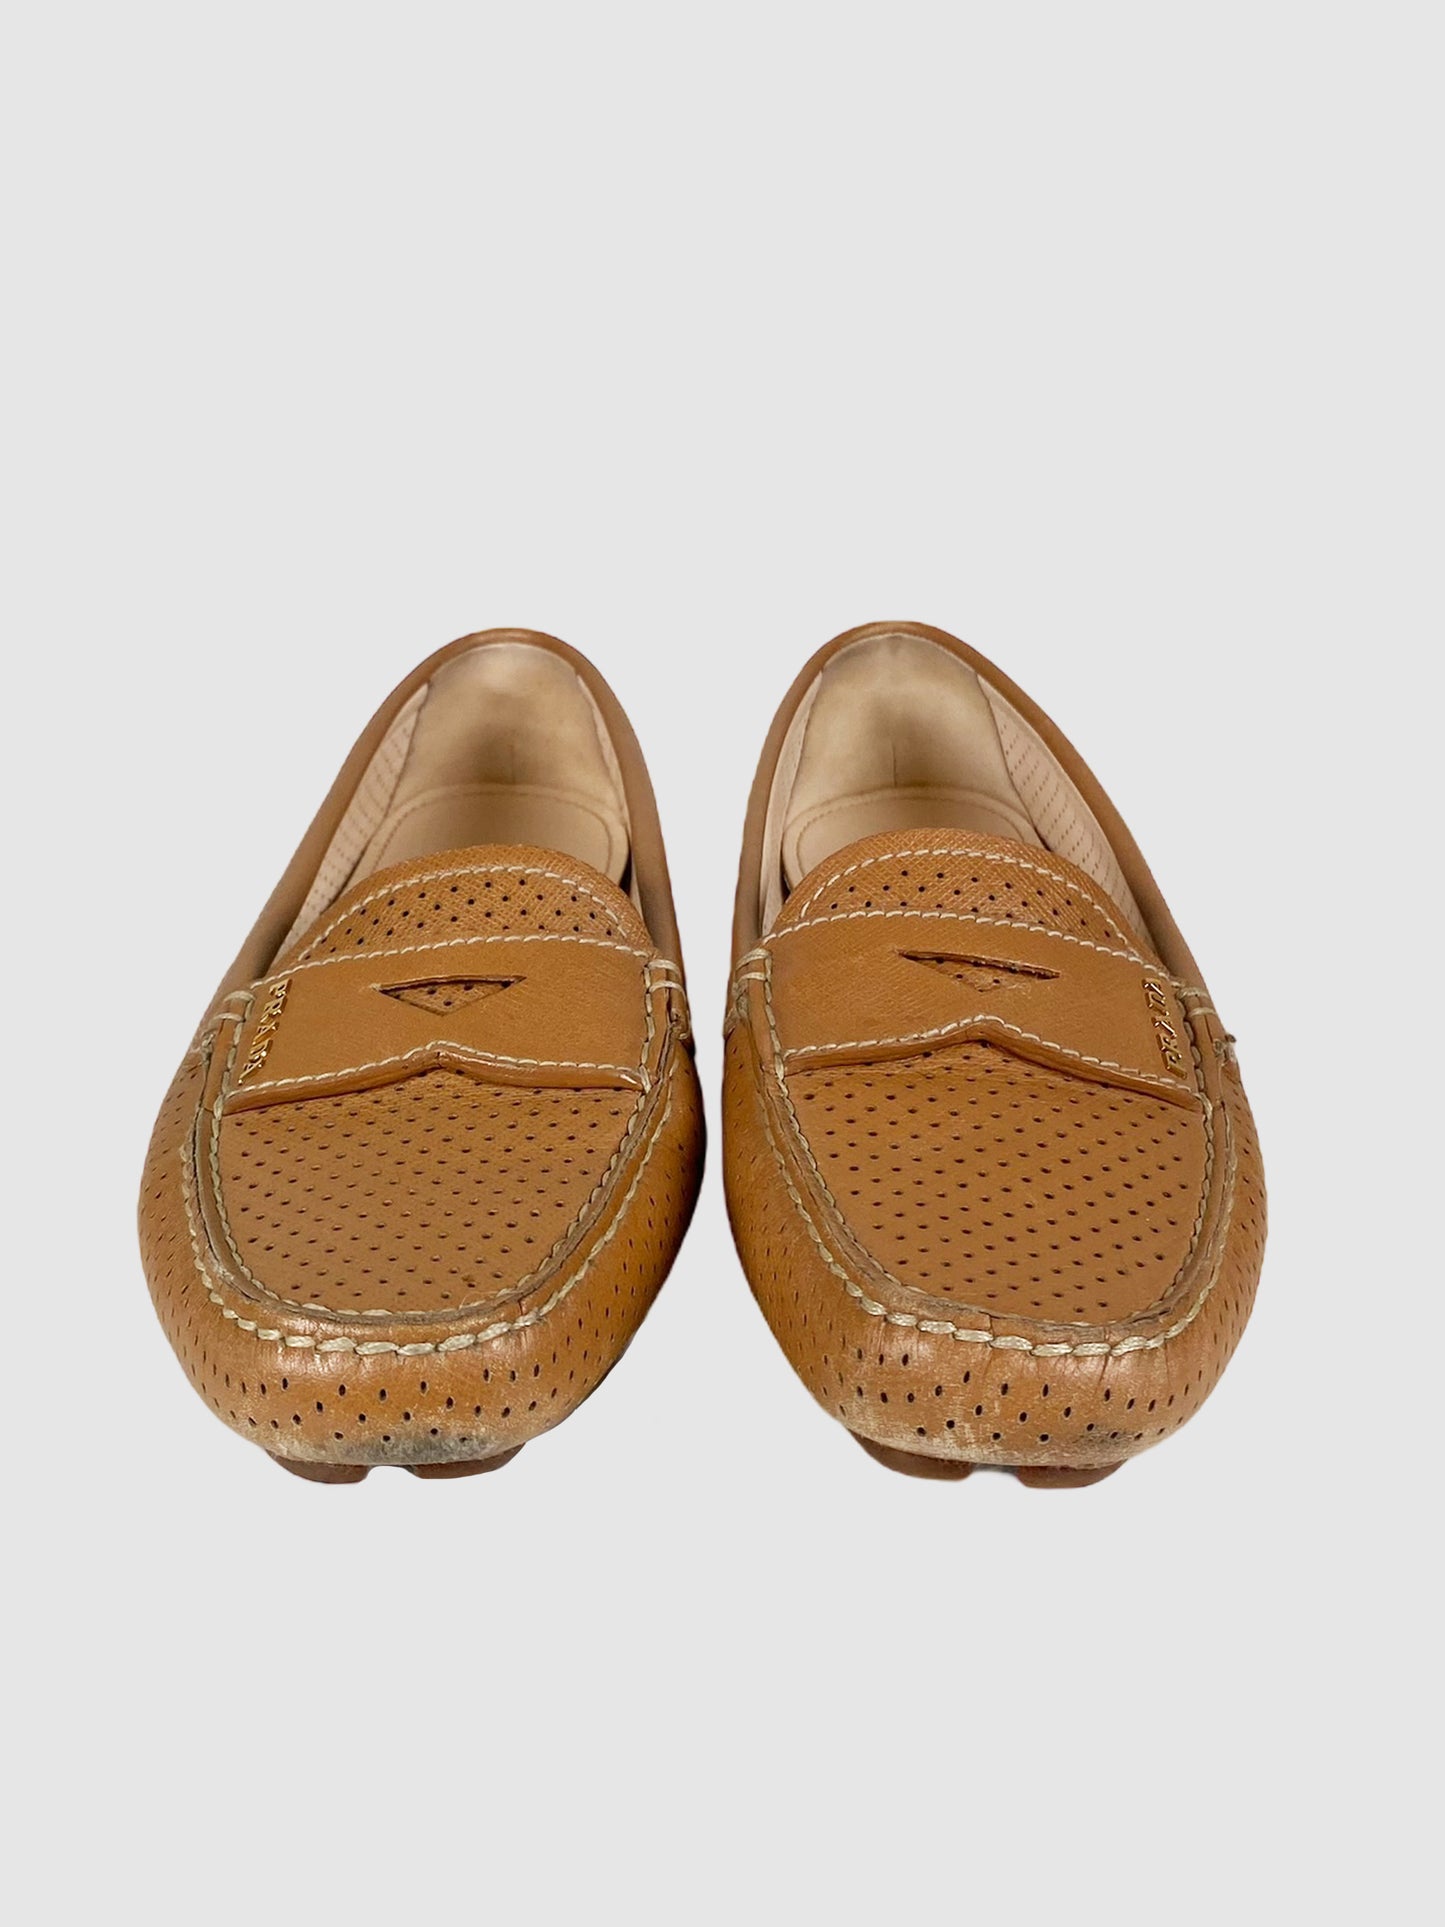 Prada Perforated Leather Loafer - Size 37